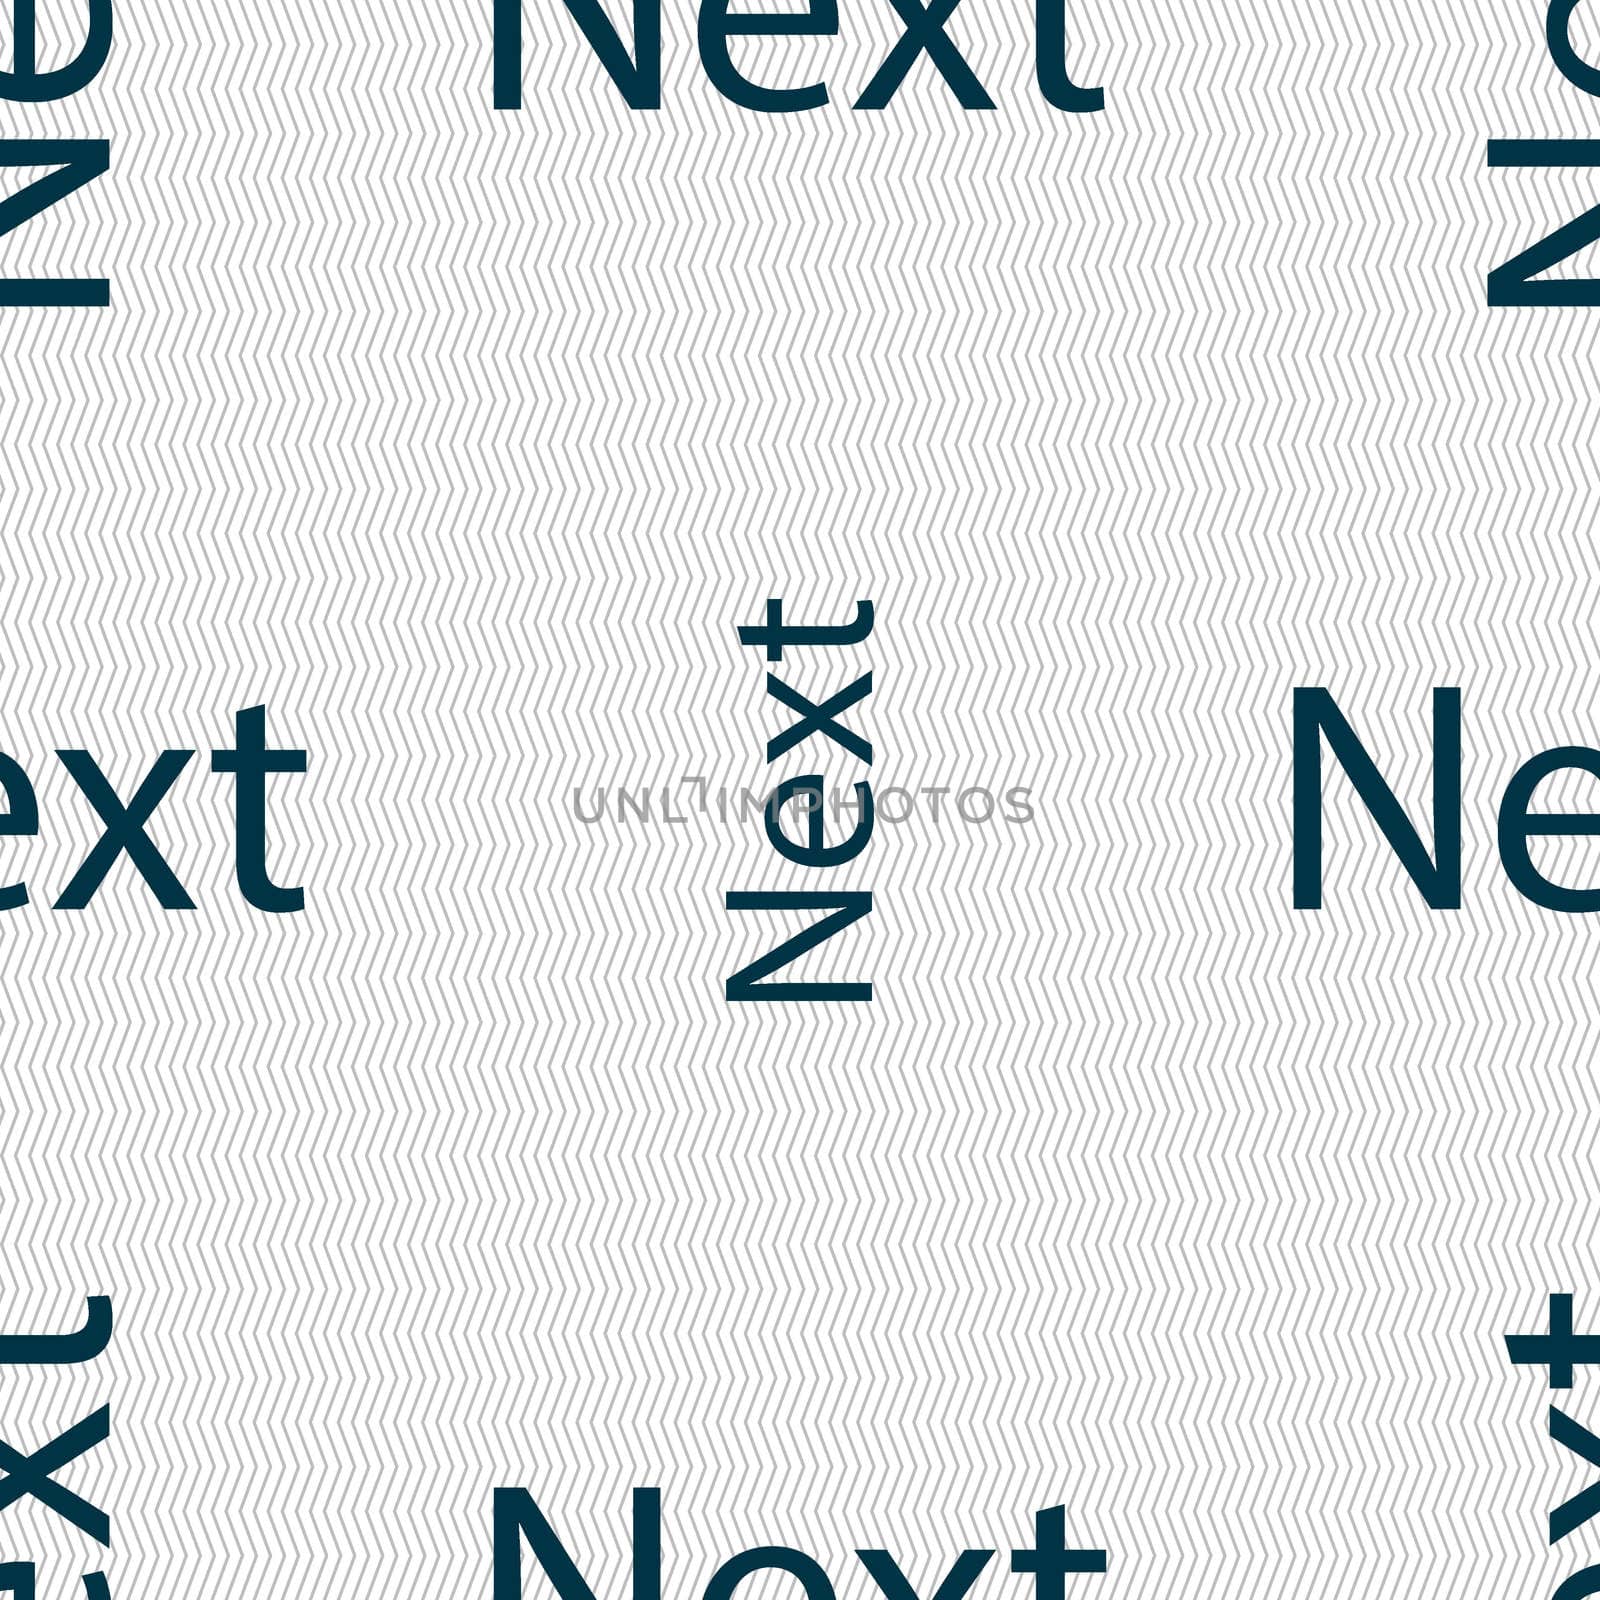 Next sign icon. Navigation symbol. Seamless abstract background with geometric shapes.  by serhii_lohvyniuk